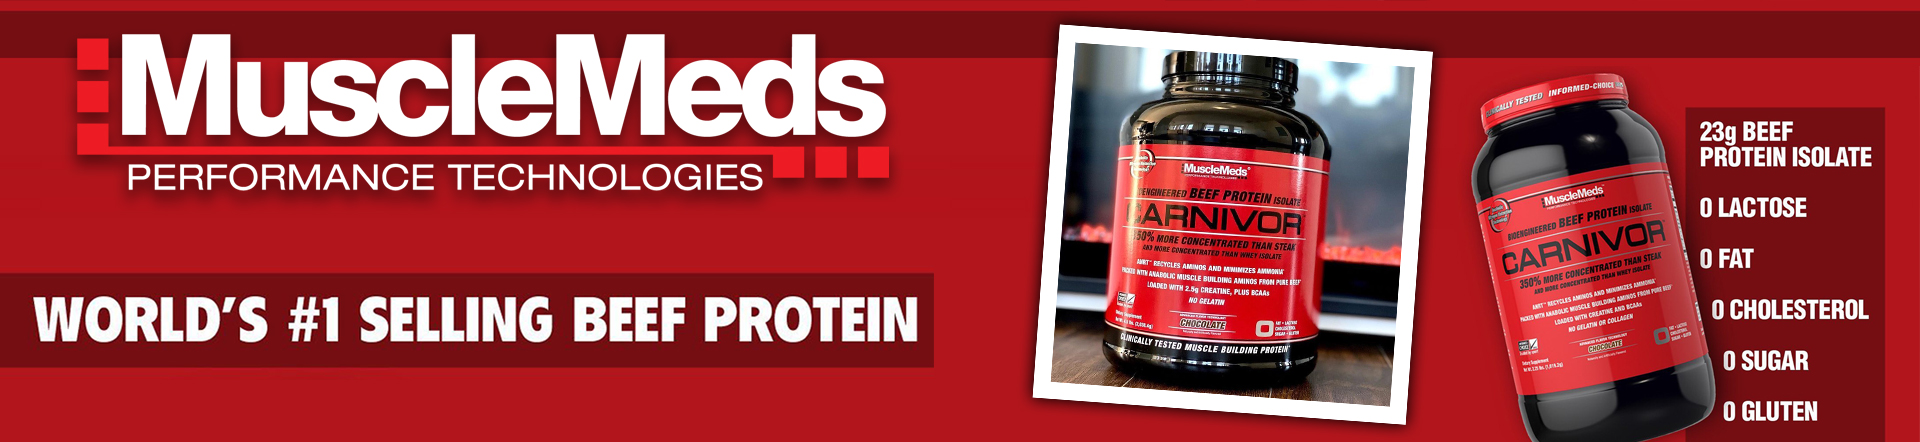 MuscleMeds Performance Technologies Beef Protein 